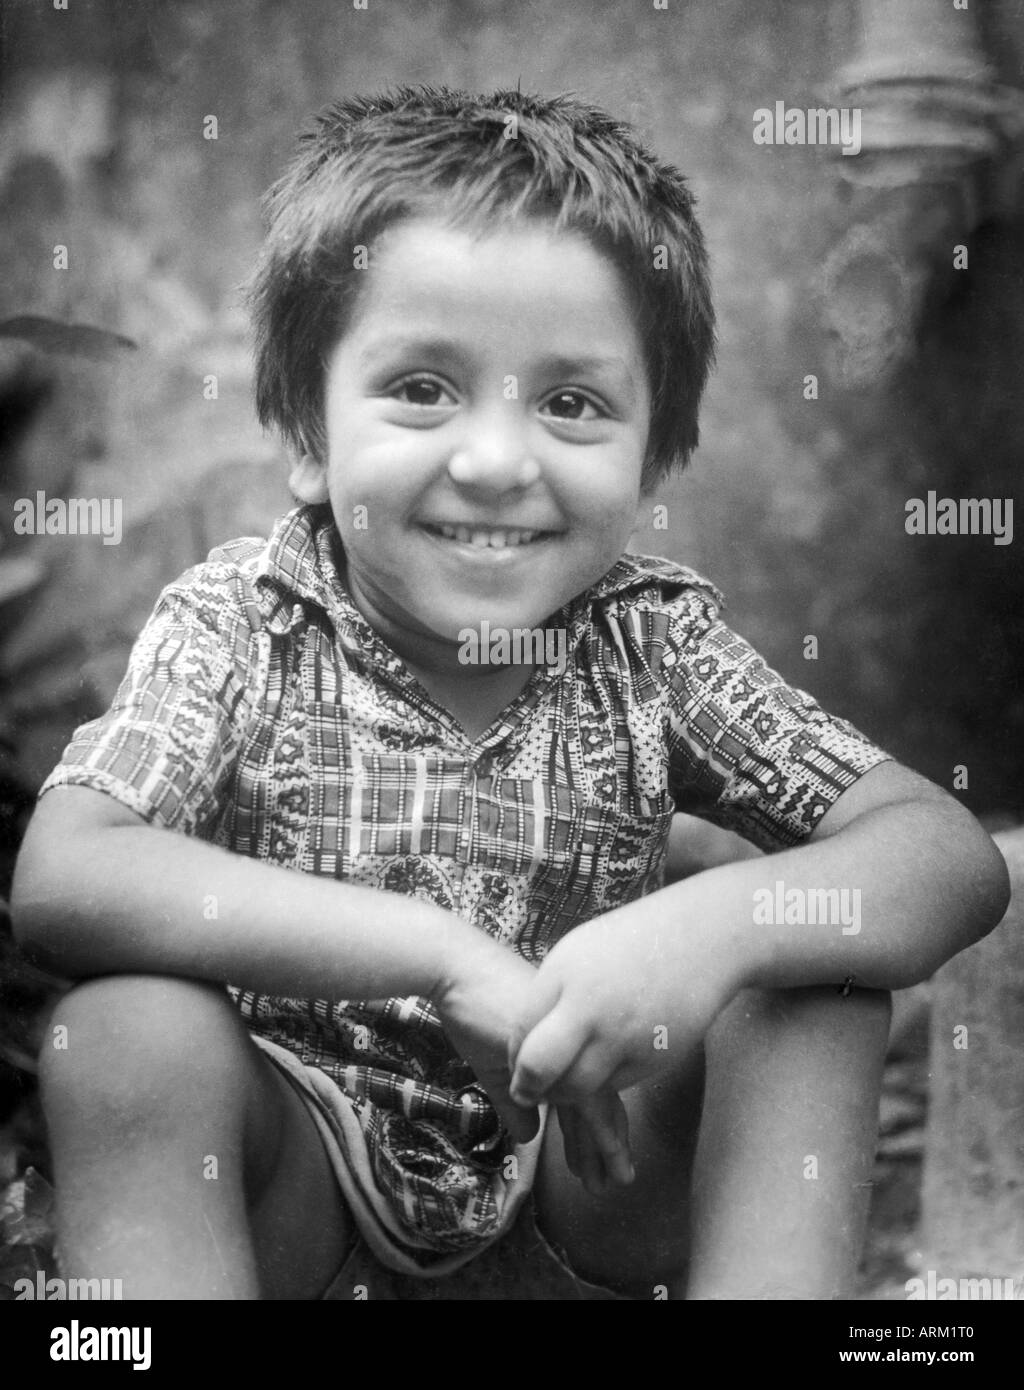 Indian boy smiling portrait India 1940s old vintage 1900s picture Stock Photo